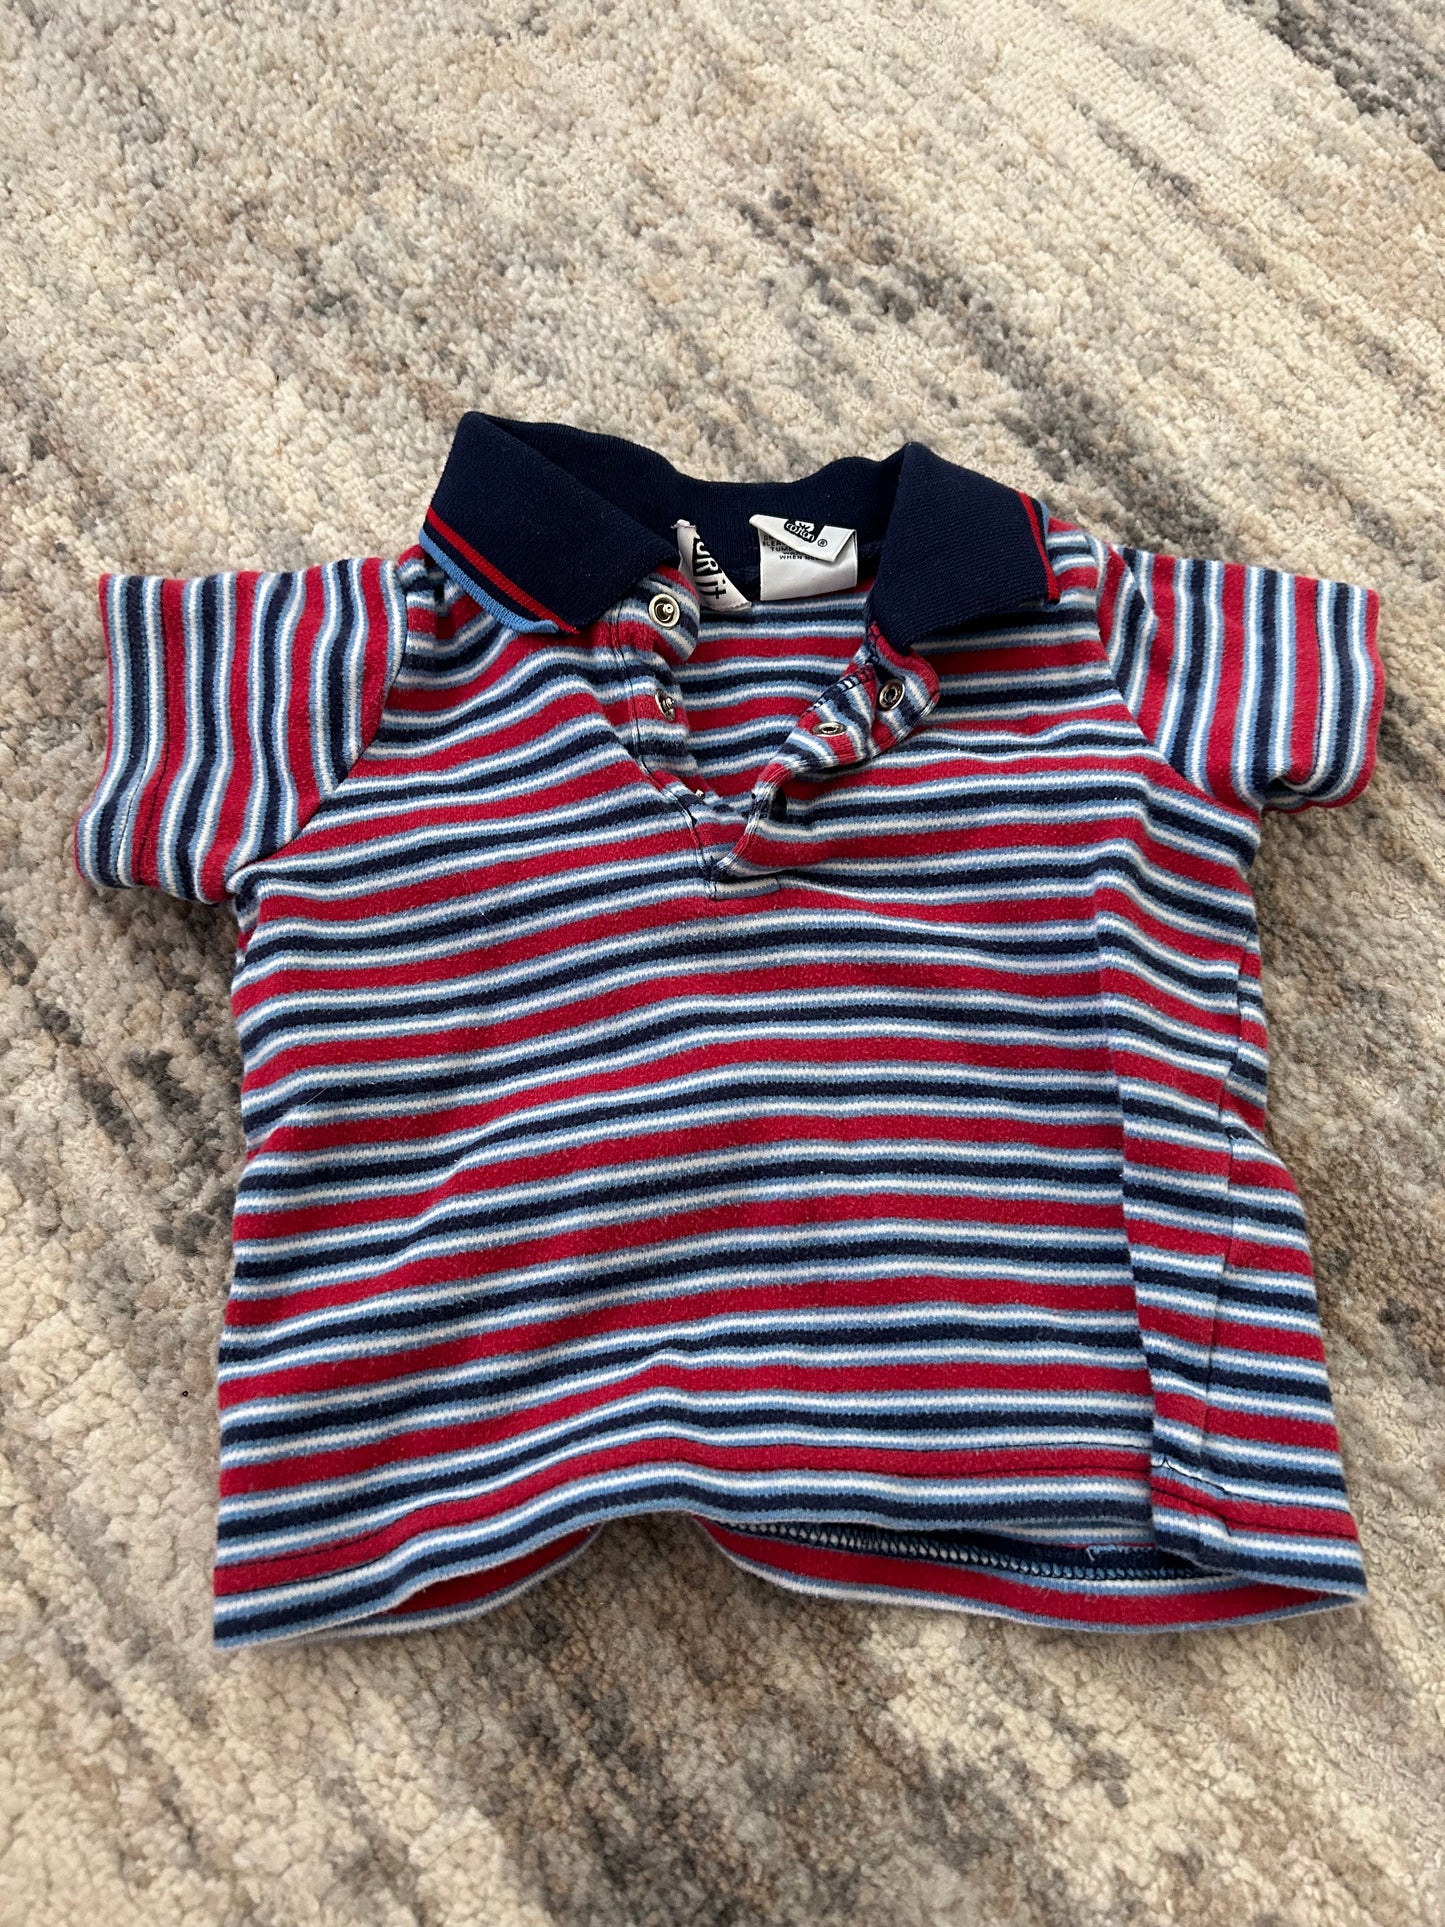 Blue red stripped polo